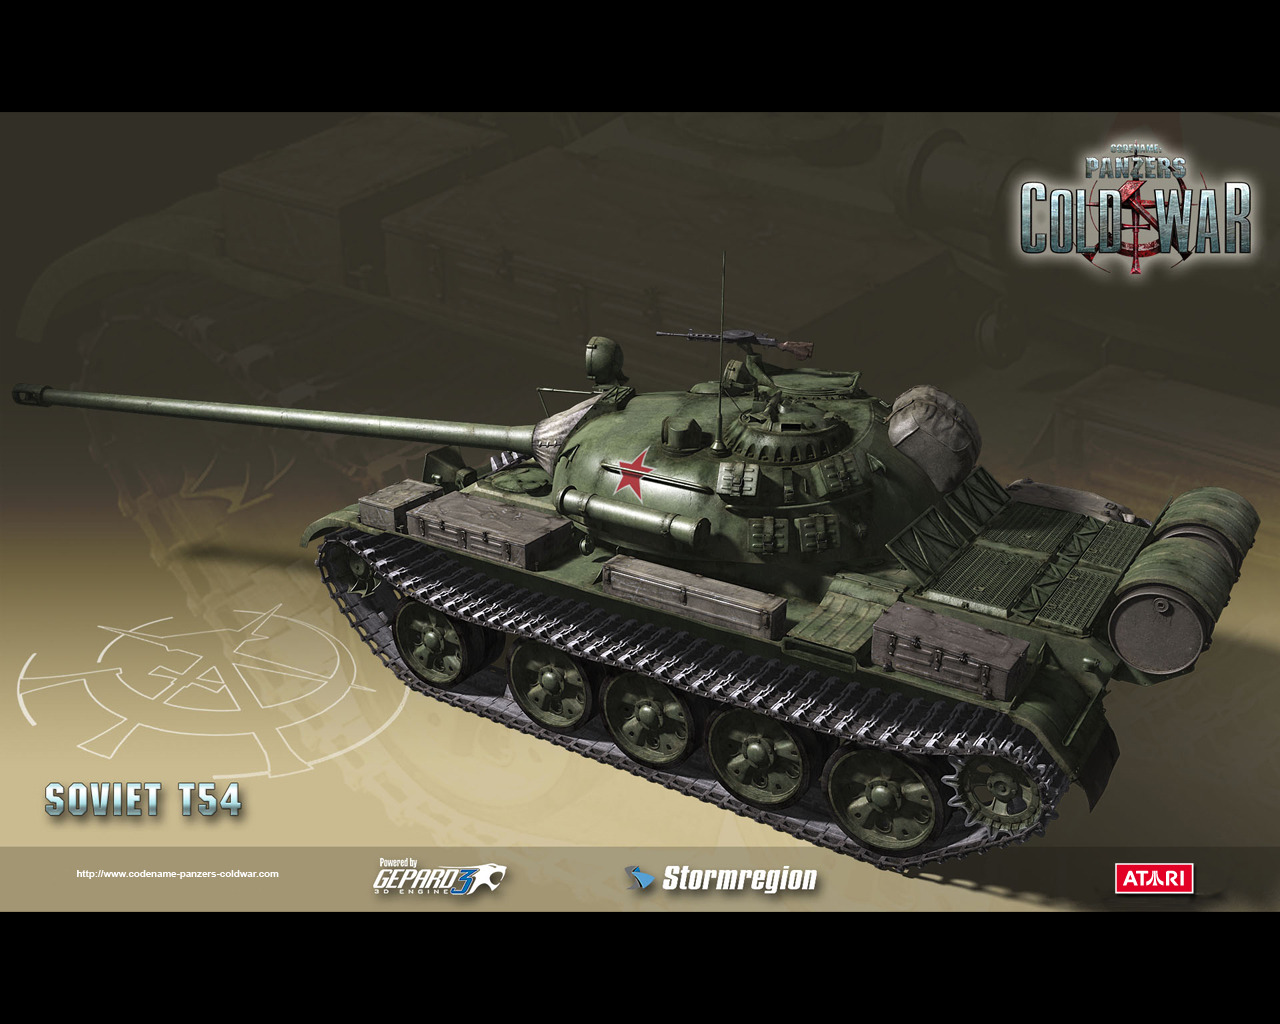 Soviet T54 Codename Panzers Cold War